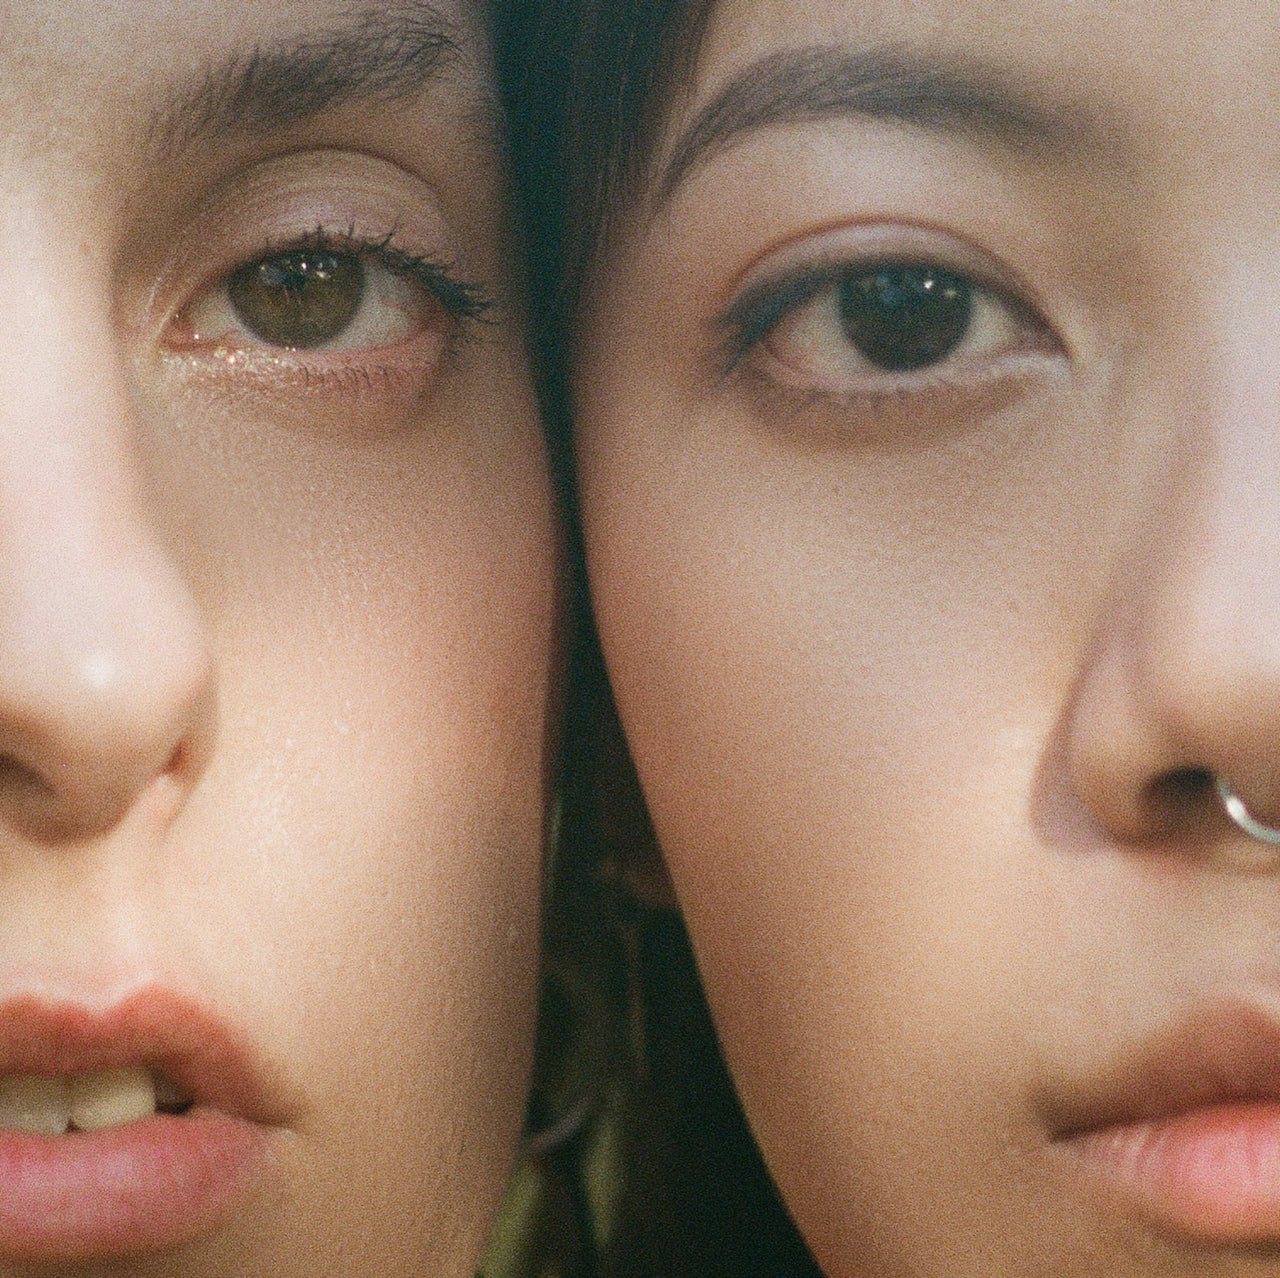 A close-up image showing one-half of two women's faces, side-by-side, as they look at the camera